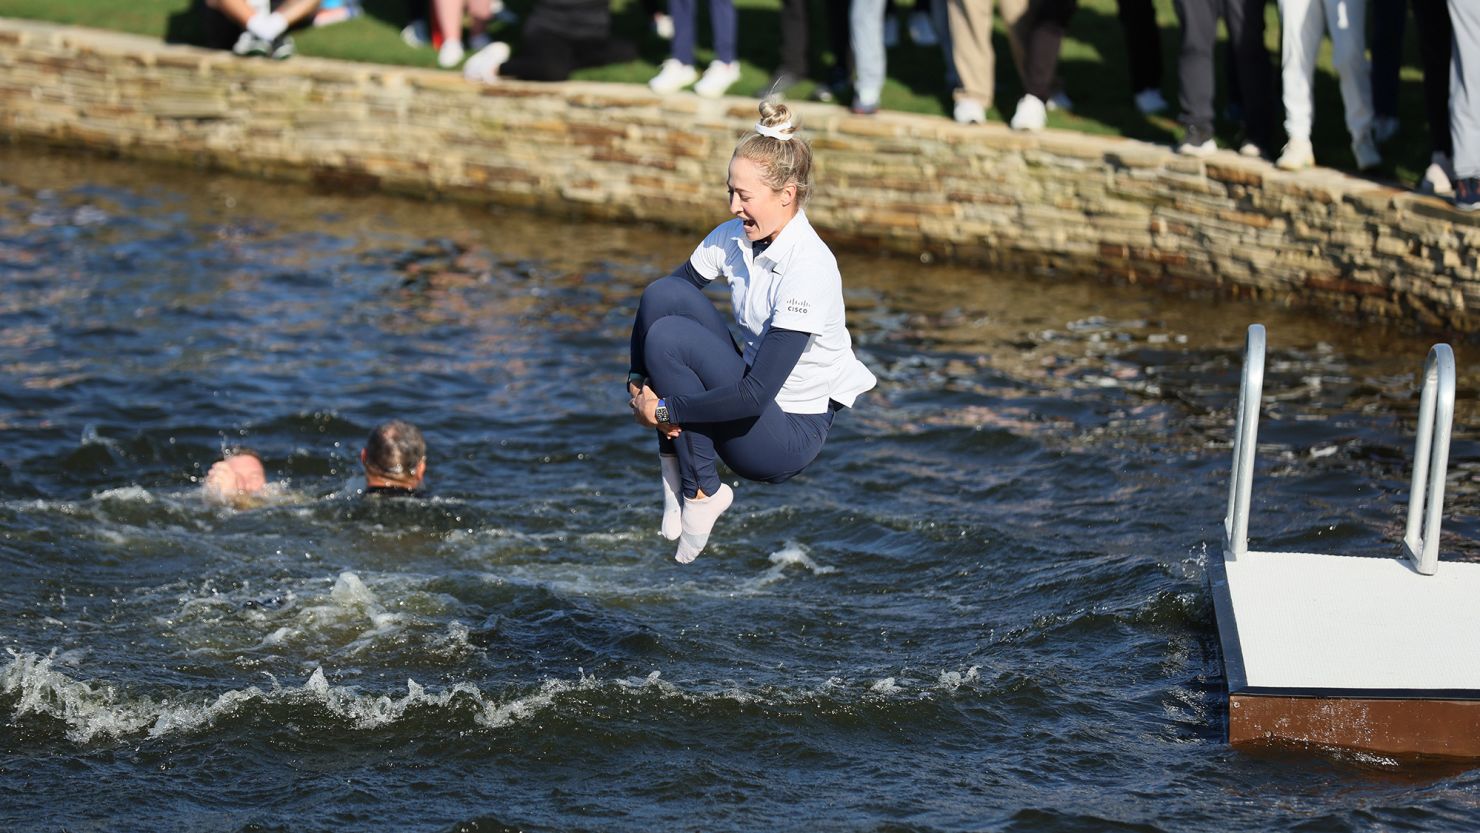 Nelly Korda jumps into the water after winning The Chevron Championship at Carlton Woods in The Woodlands, Texas.